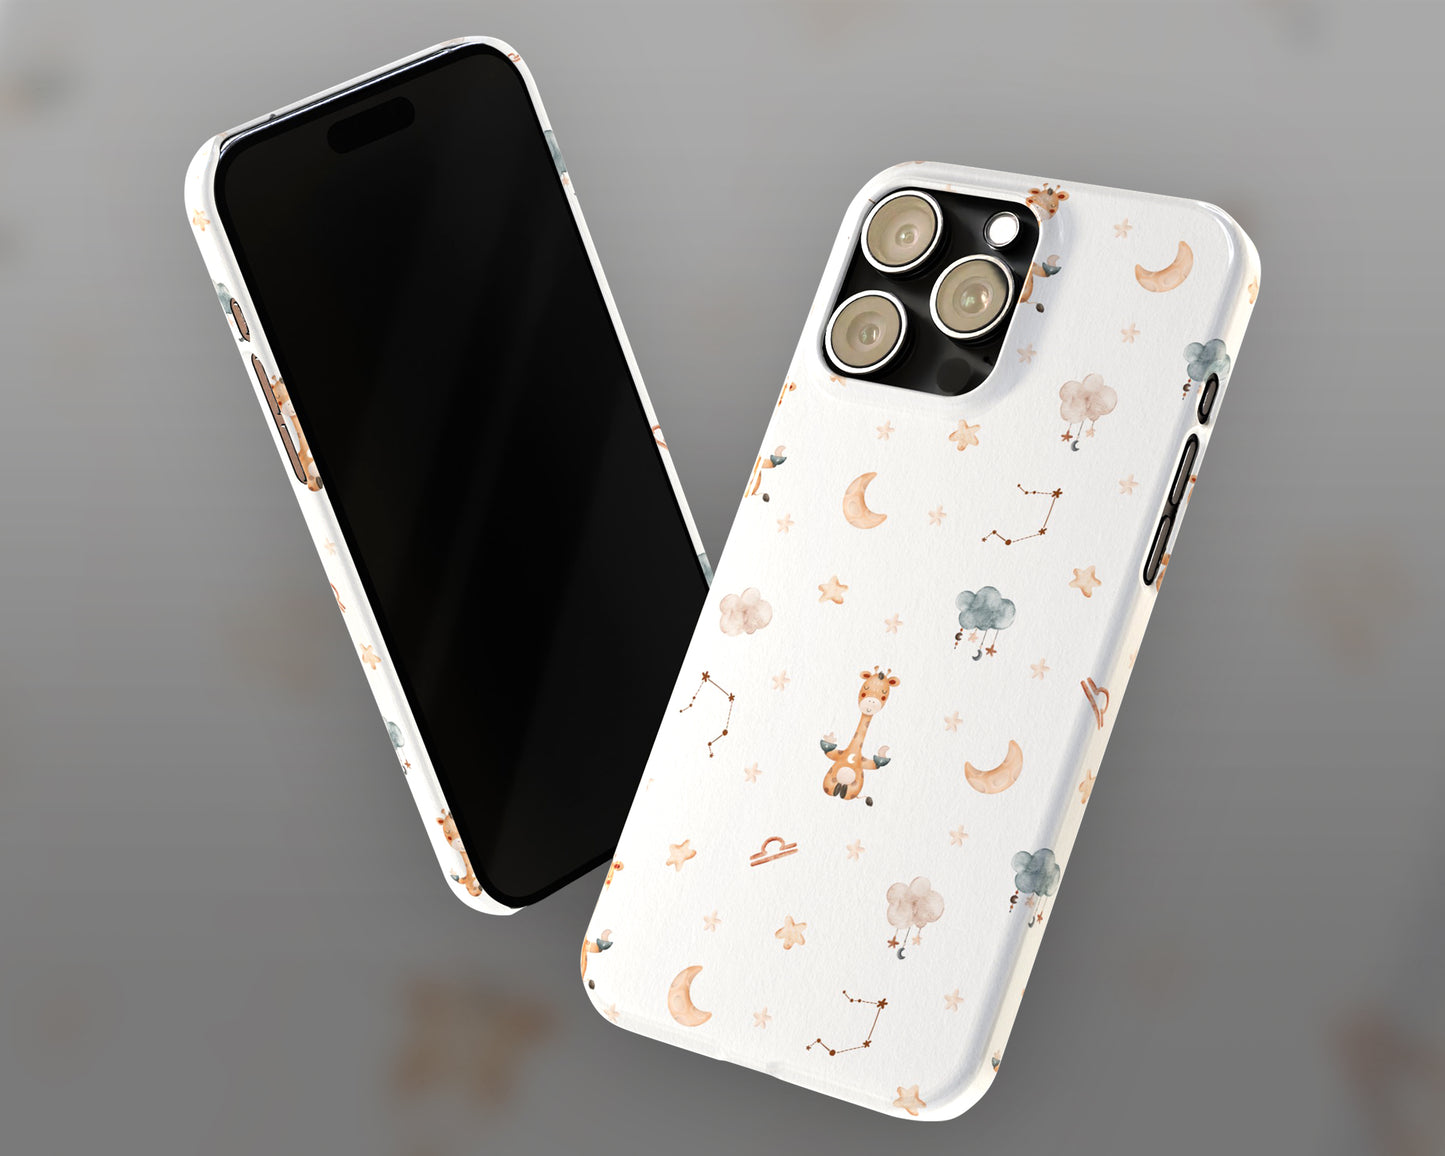 Libra Zodiac sign watercolor baby pattern iPhone case